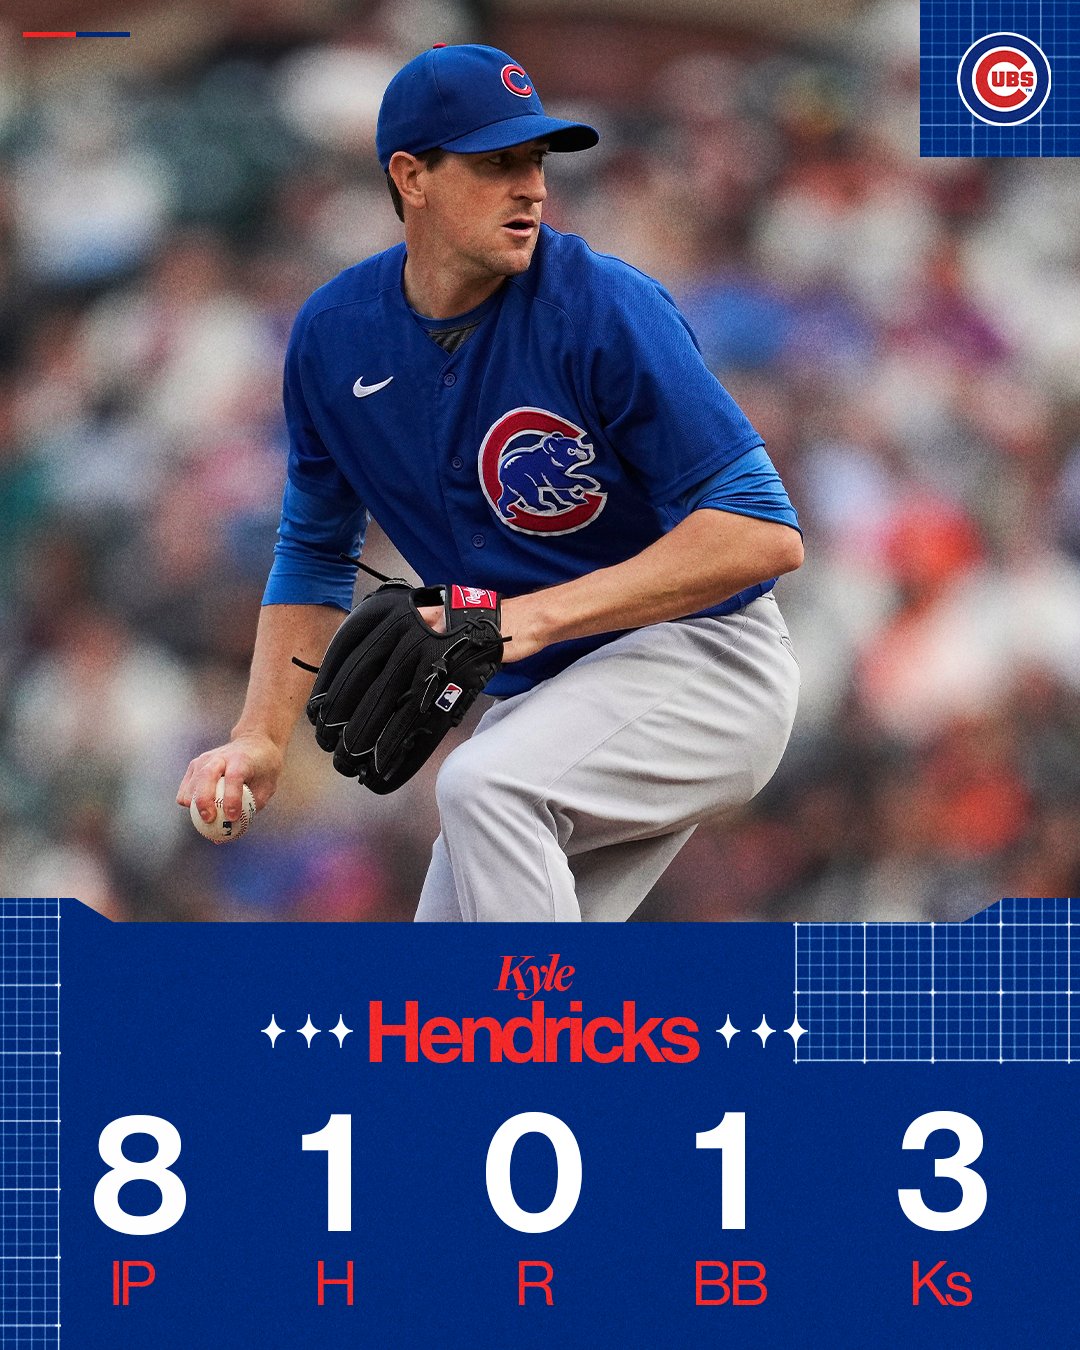 MLB on X: What a performance from Kyle Hendricks! 8 innings of